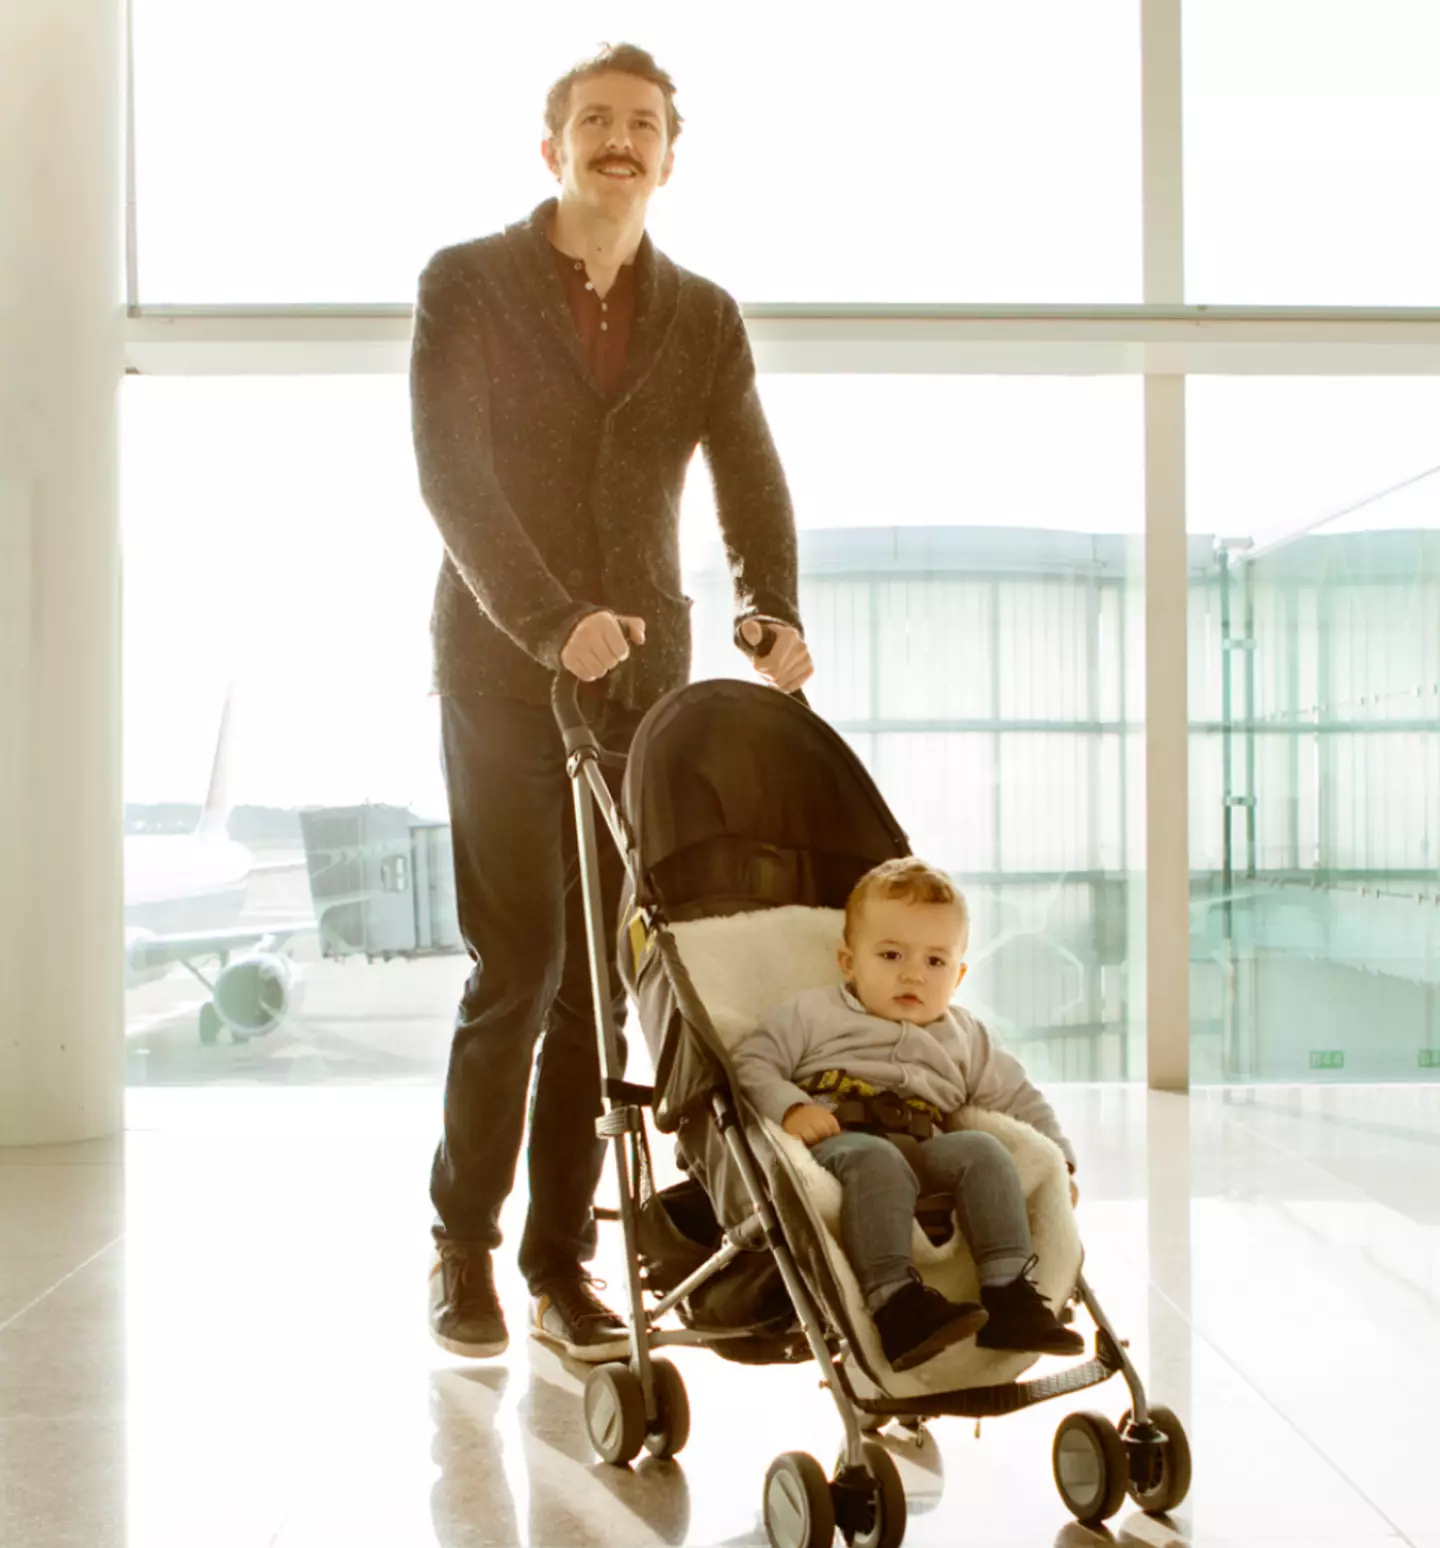 The dad-of-two said bringing a pushchair to the airport speeds things up.